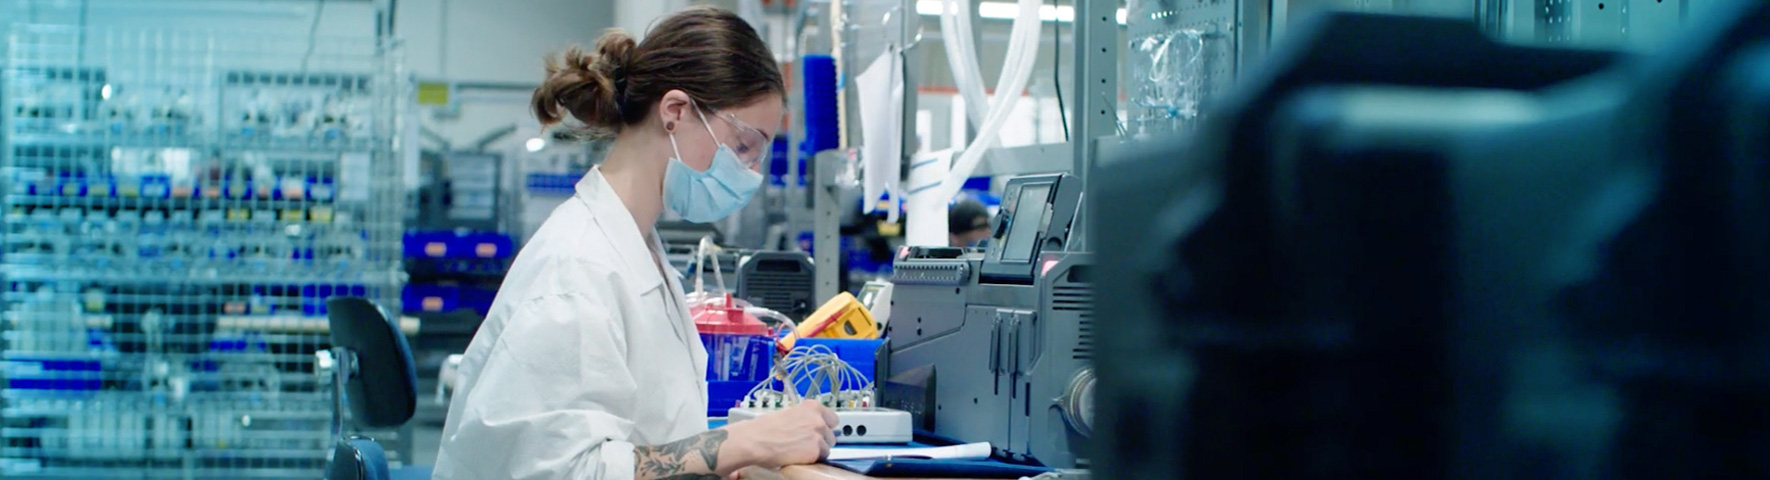 thornhill-manufacturing-factory-worker-1770x480